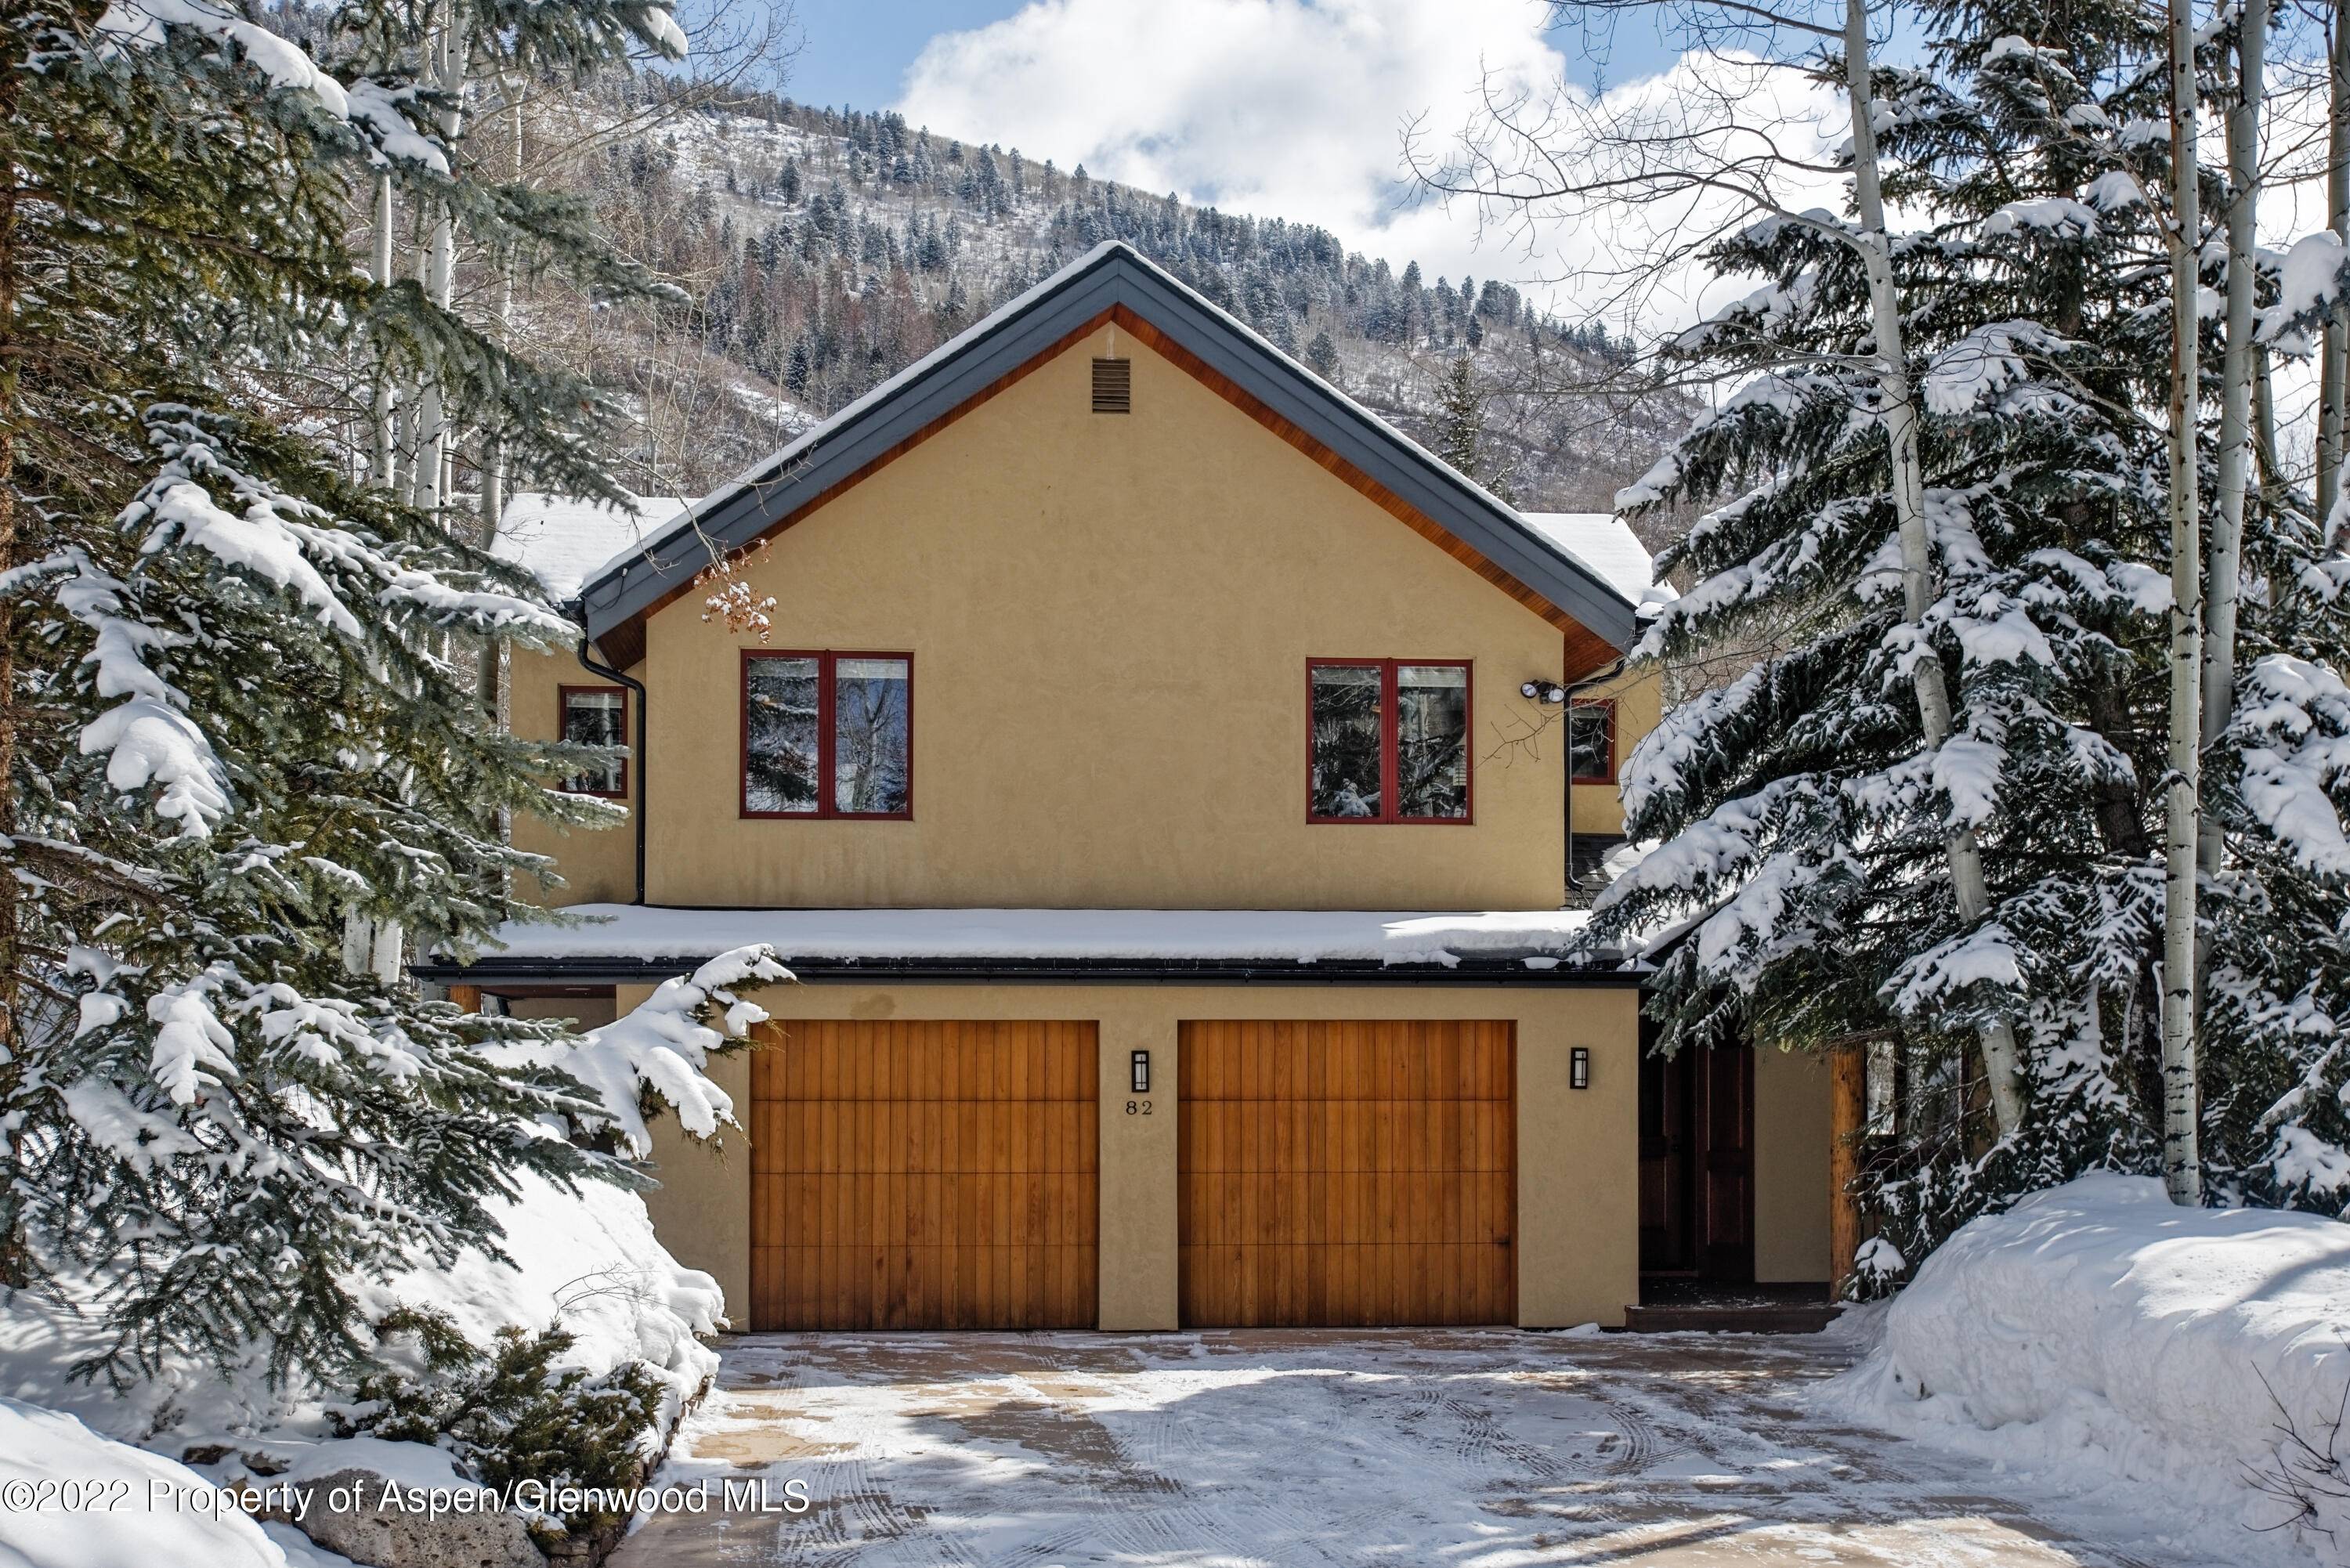 Your opportunity to own a mountain retreat in the city limits of Aspen !